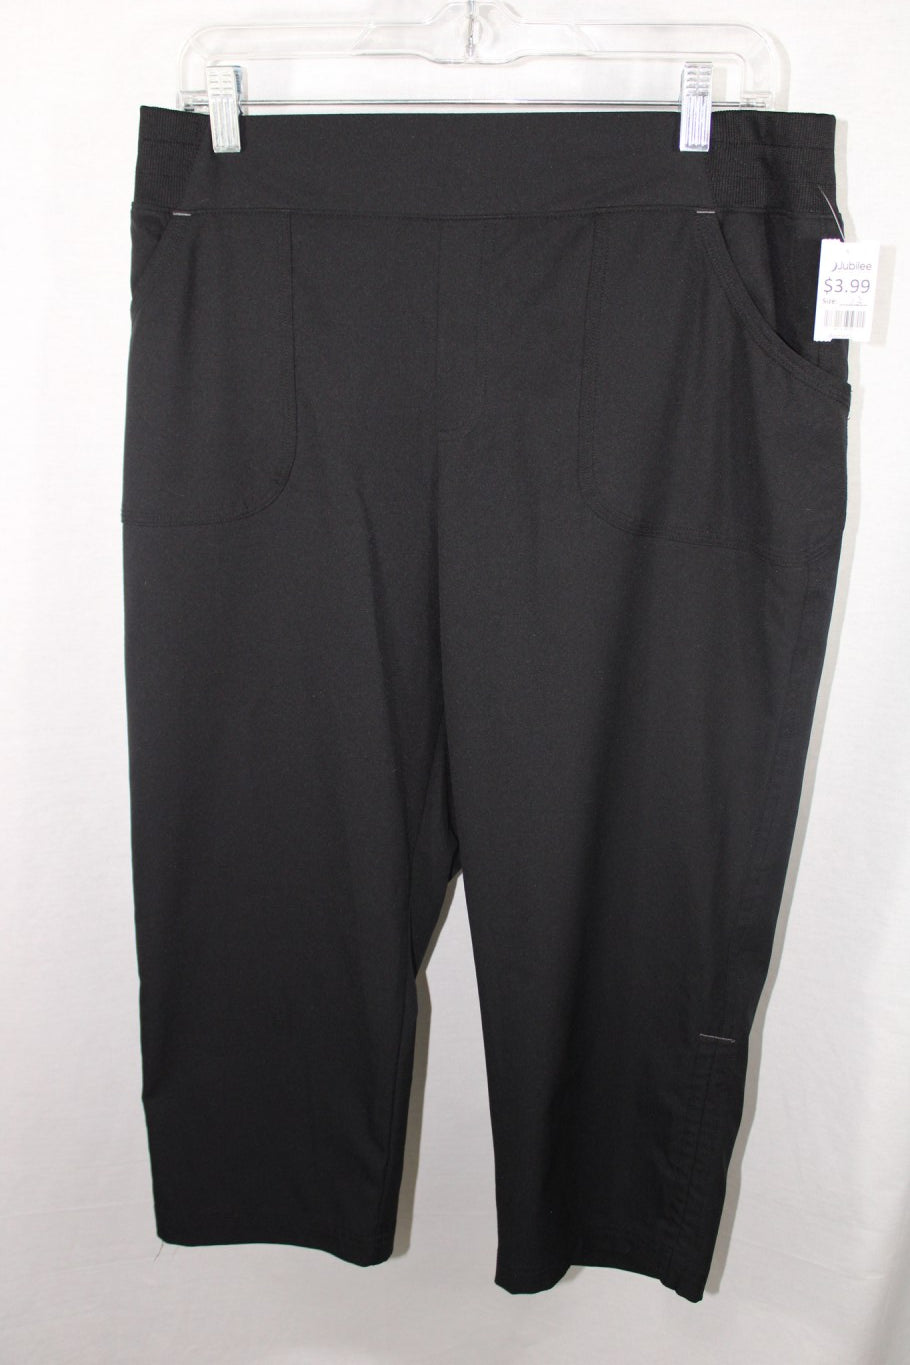 Made For Life Pants | Size 12